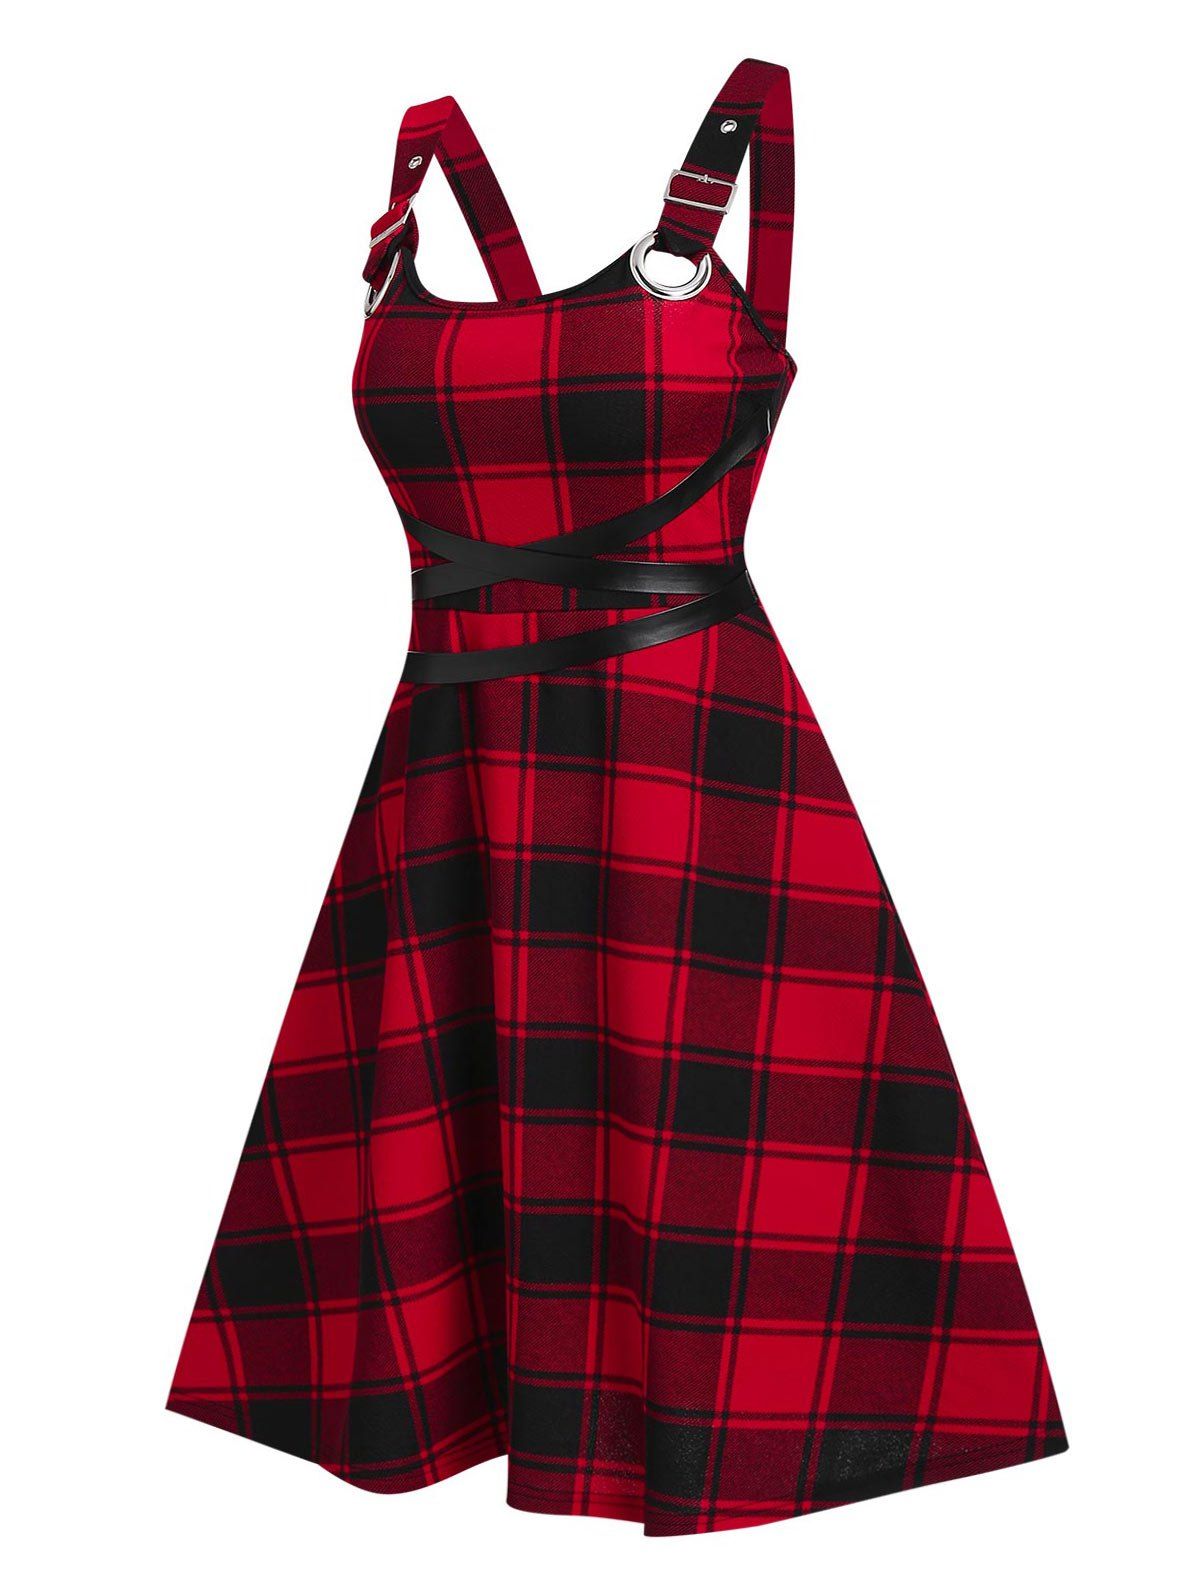 Punk Plaid Buckled Straps Flare Dress - DEEP RED XL